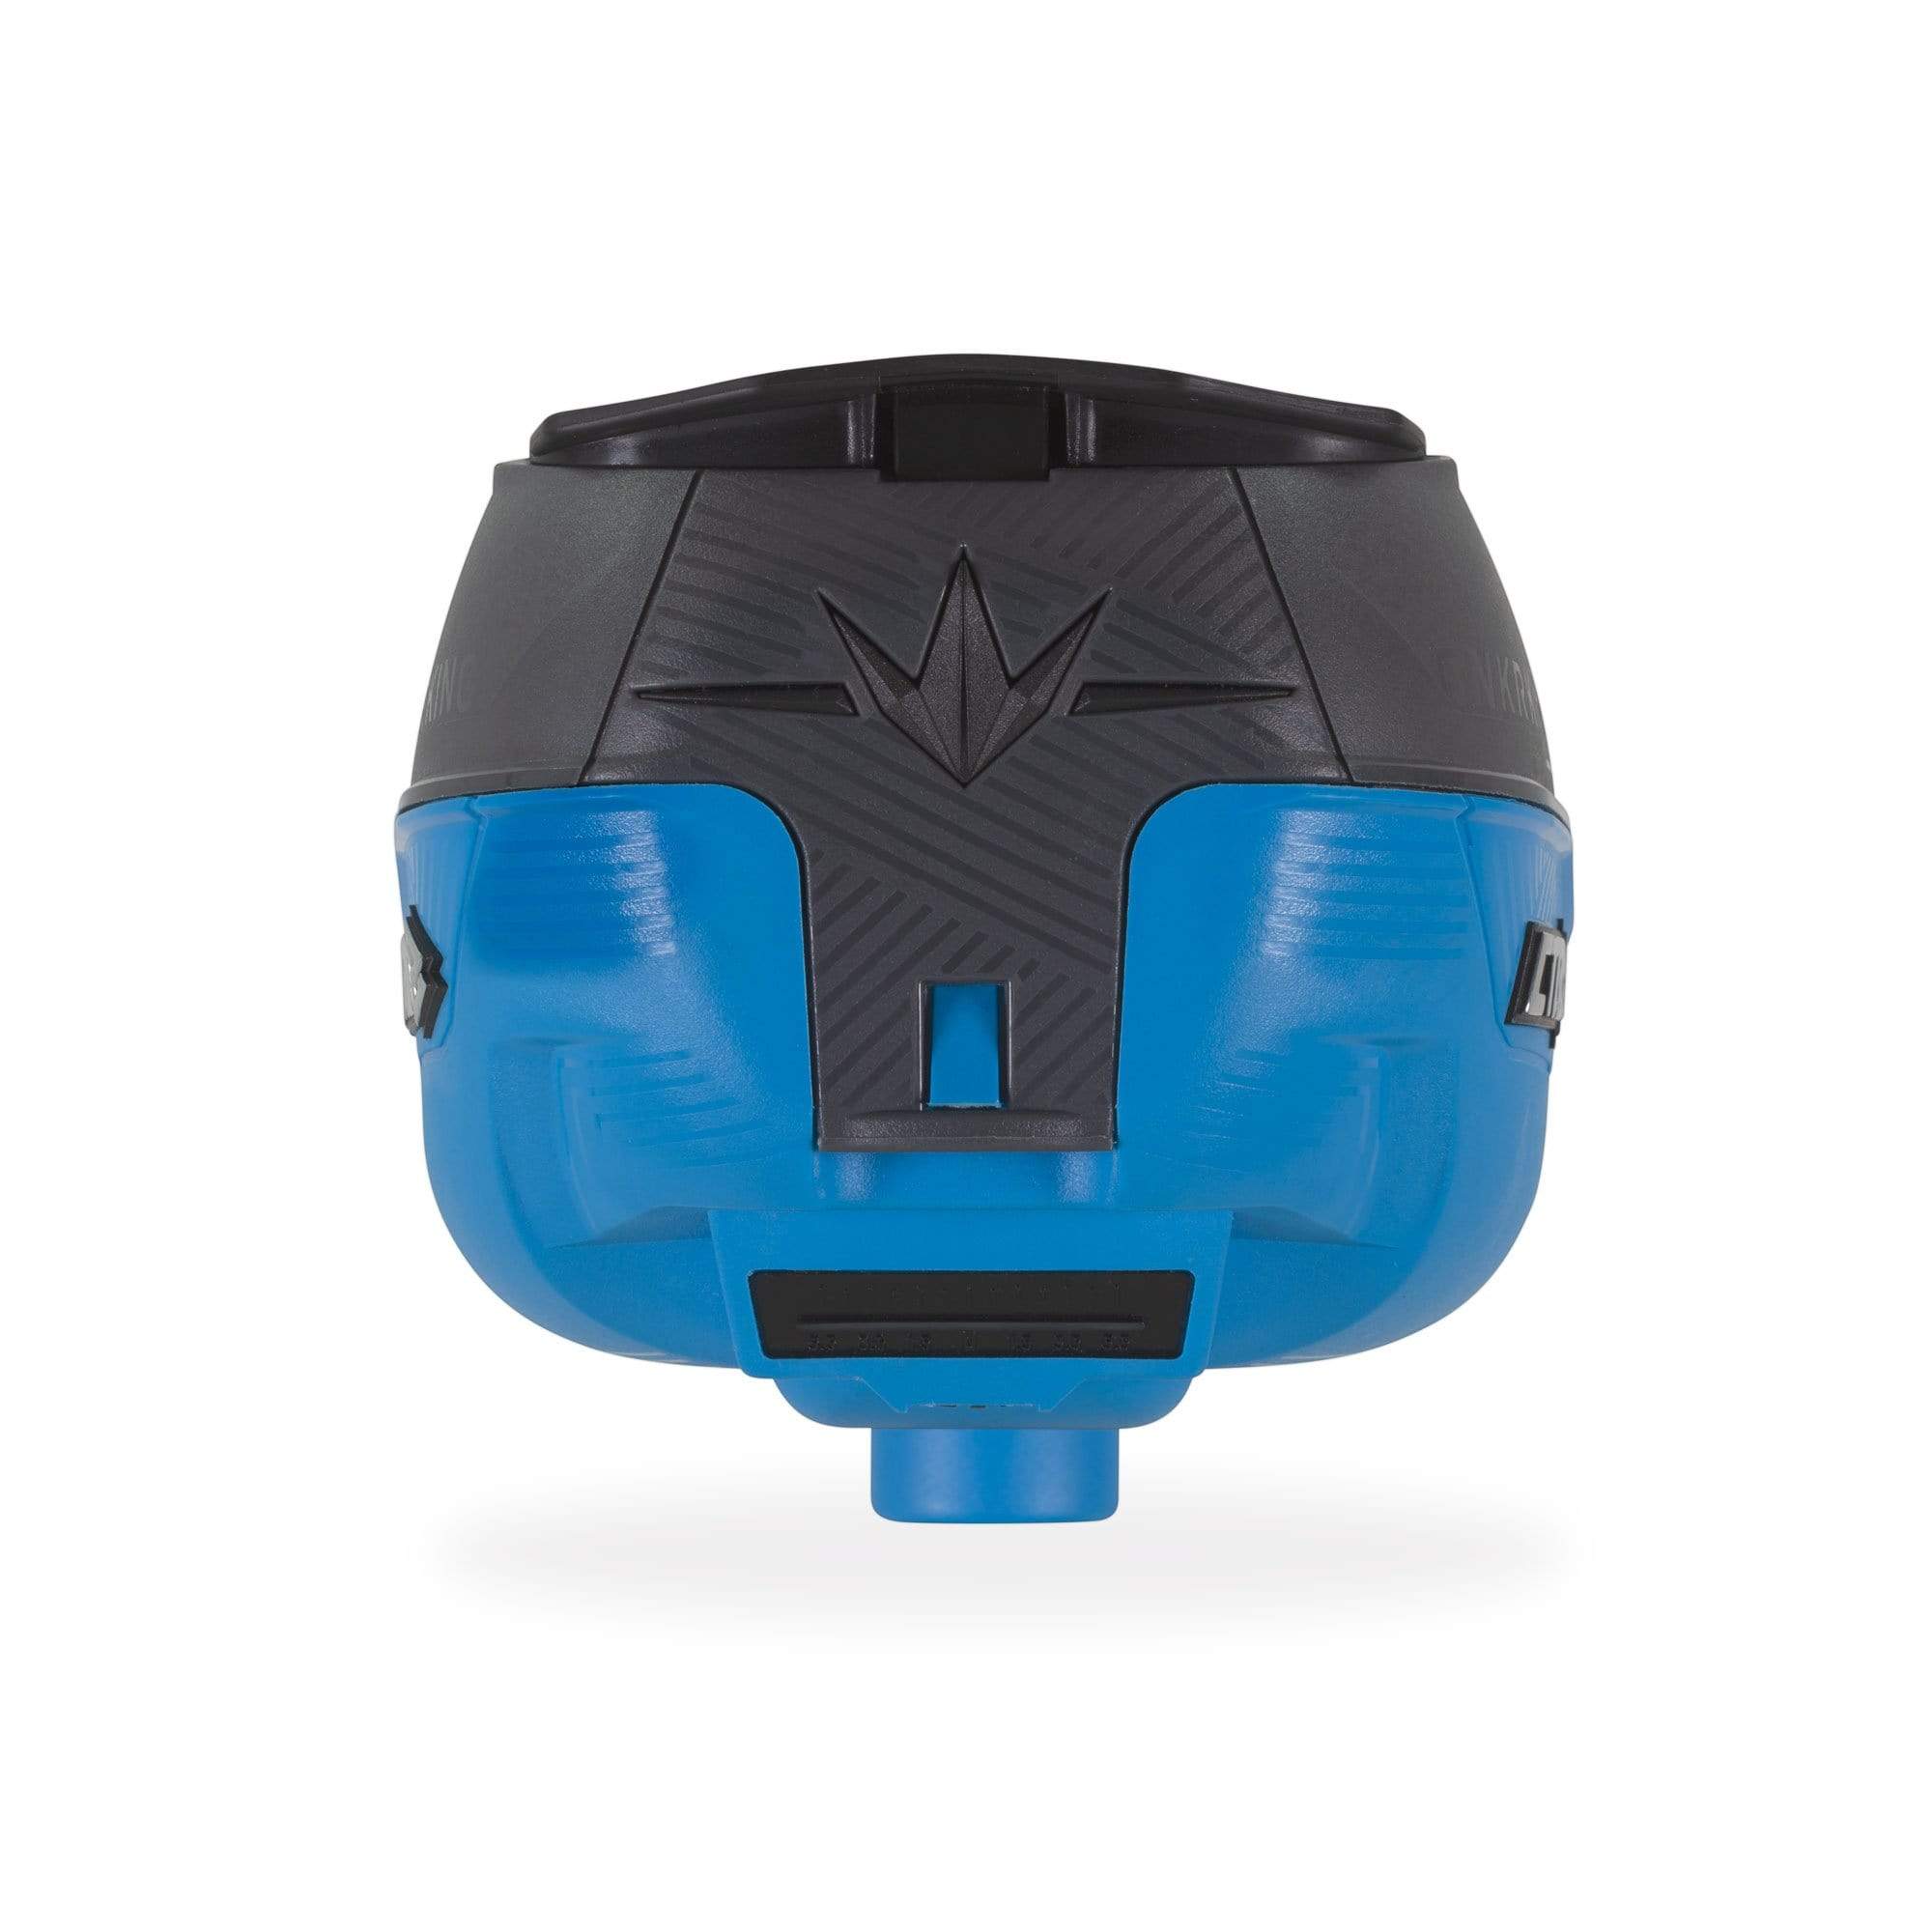 Bunkerkings CTRL Loader - Graphic Blue - Eminent Paintball And Airsoft